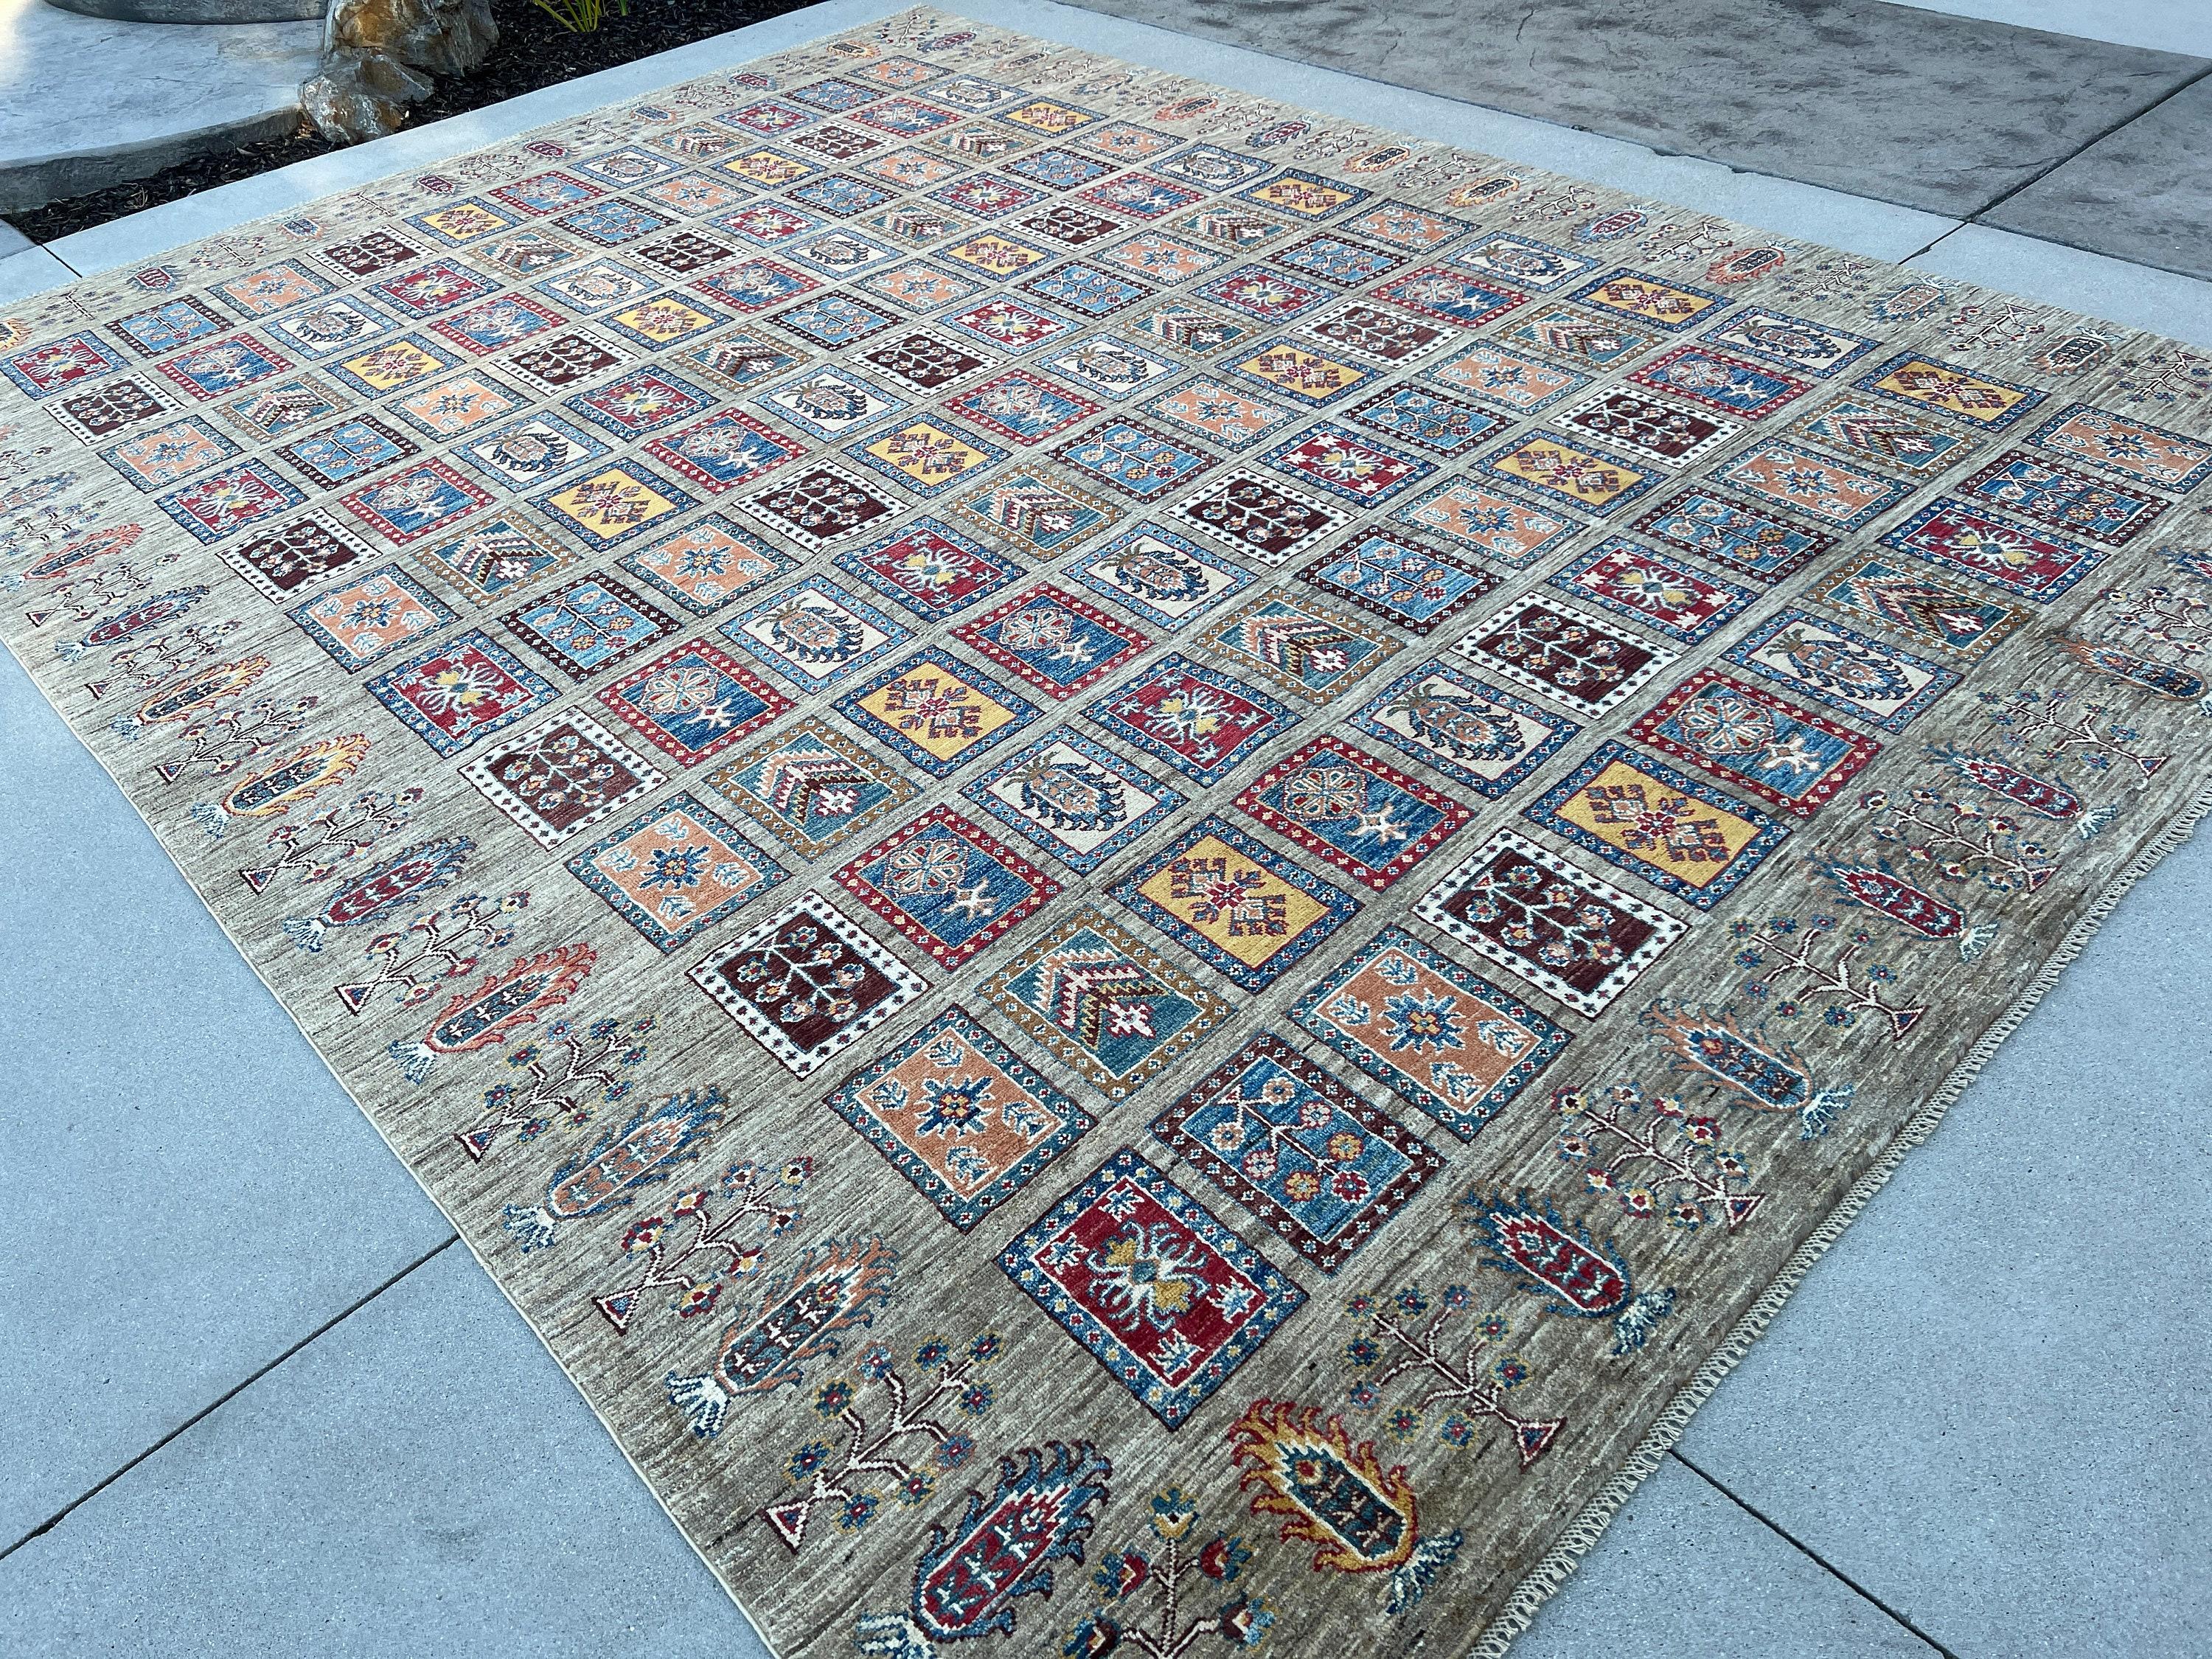 Contemporary Hand-Knotted Afghan Rug Premium Hand-Spun Afghan Wool Fair Trade For Sale